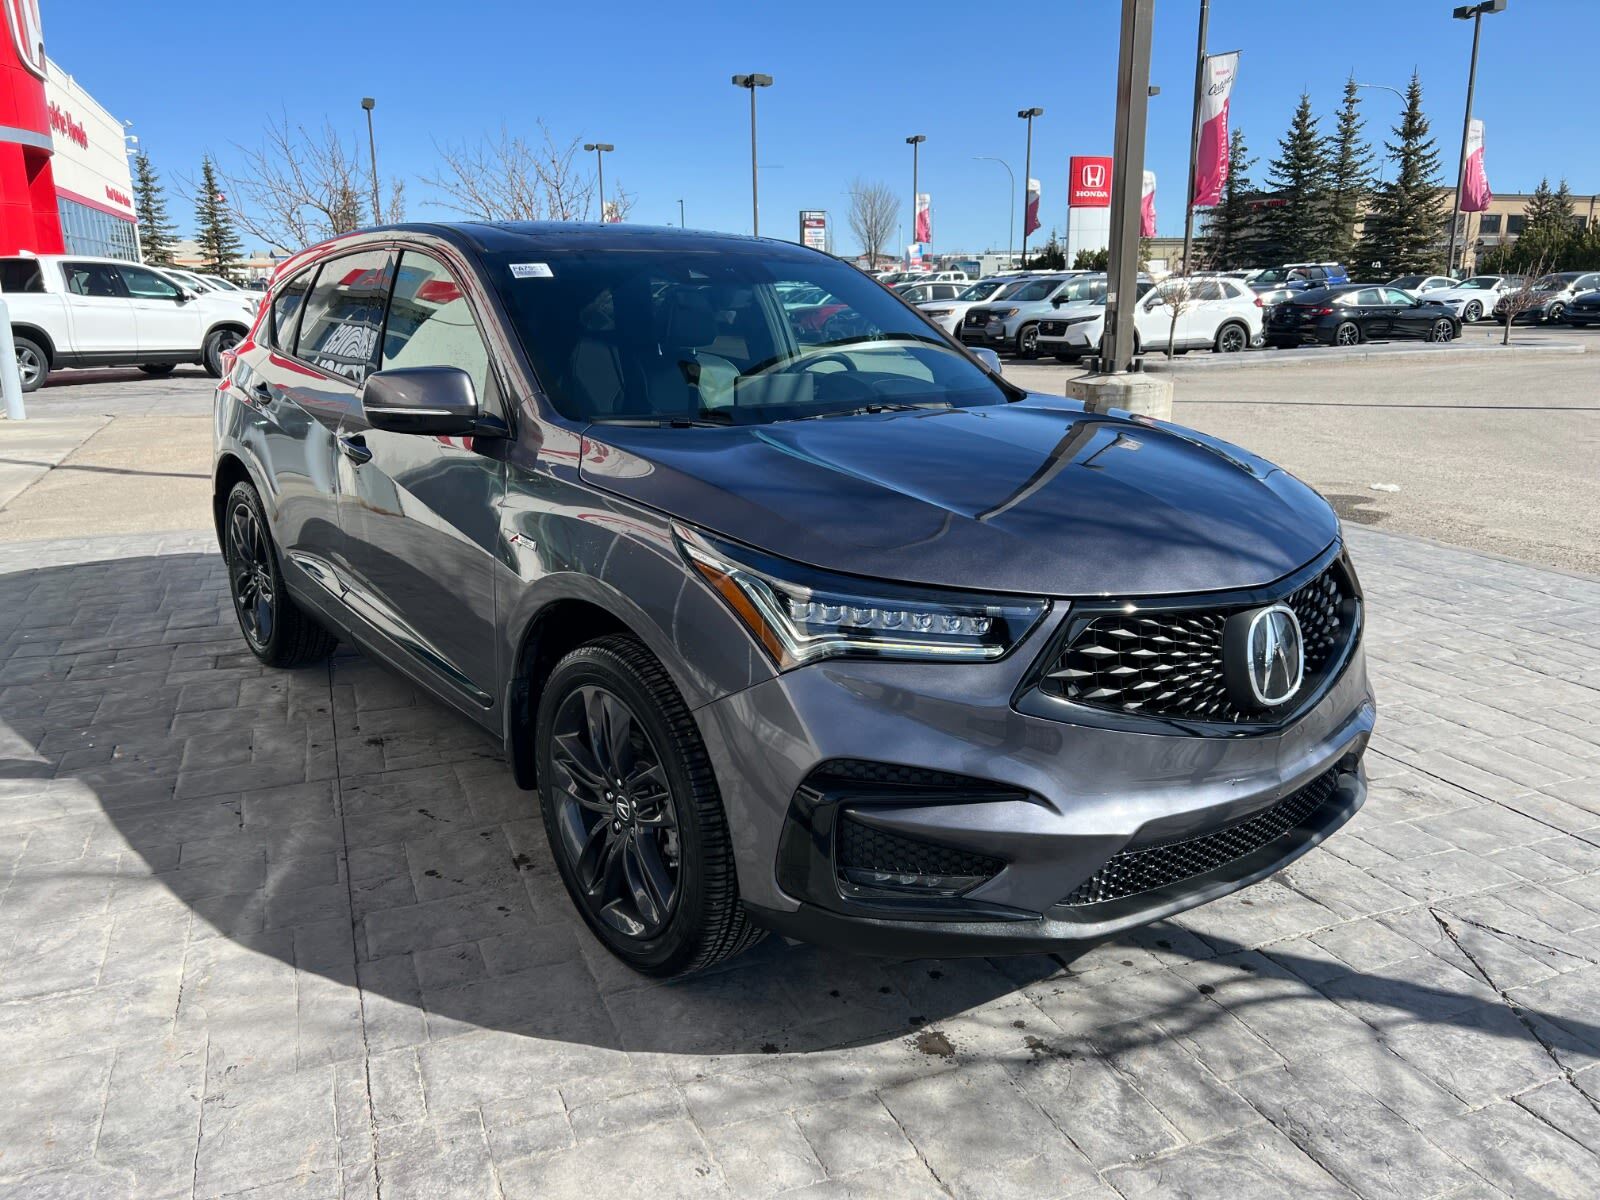 2020 Acura RDX A-Spec - One Owner, Heated Wheel, Navigation